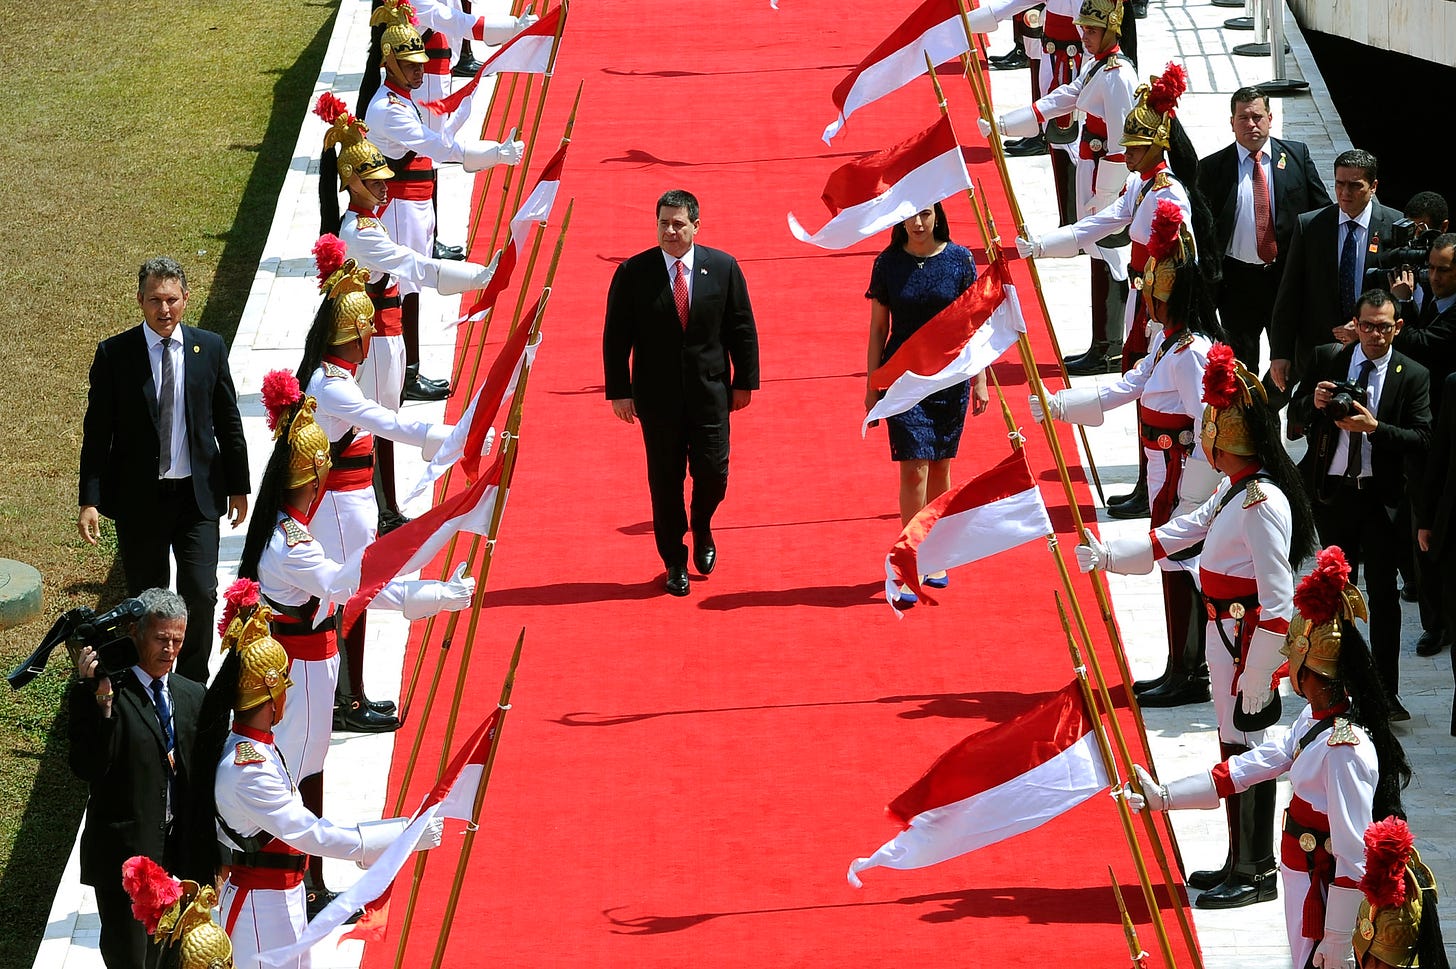 President of Paraguay Horacio Cartes walks on a red carpet with a platoon of uniformed flag bearers lining his route. Photo was taken  August 21, 2017 when Cartes was still president of Paraguay and was attending an event at the country's national Congress.